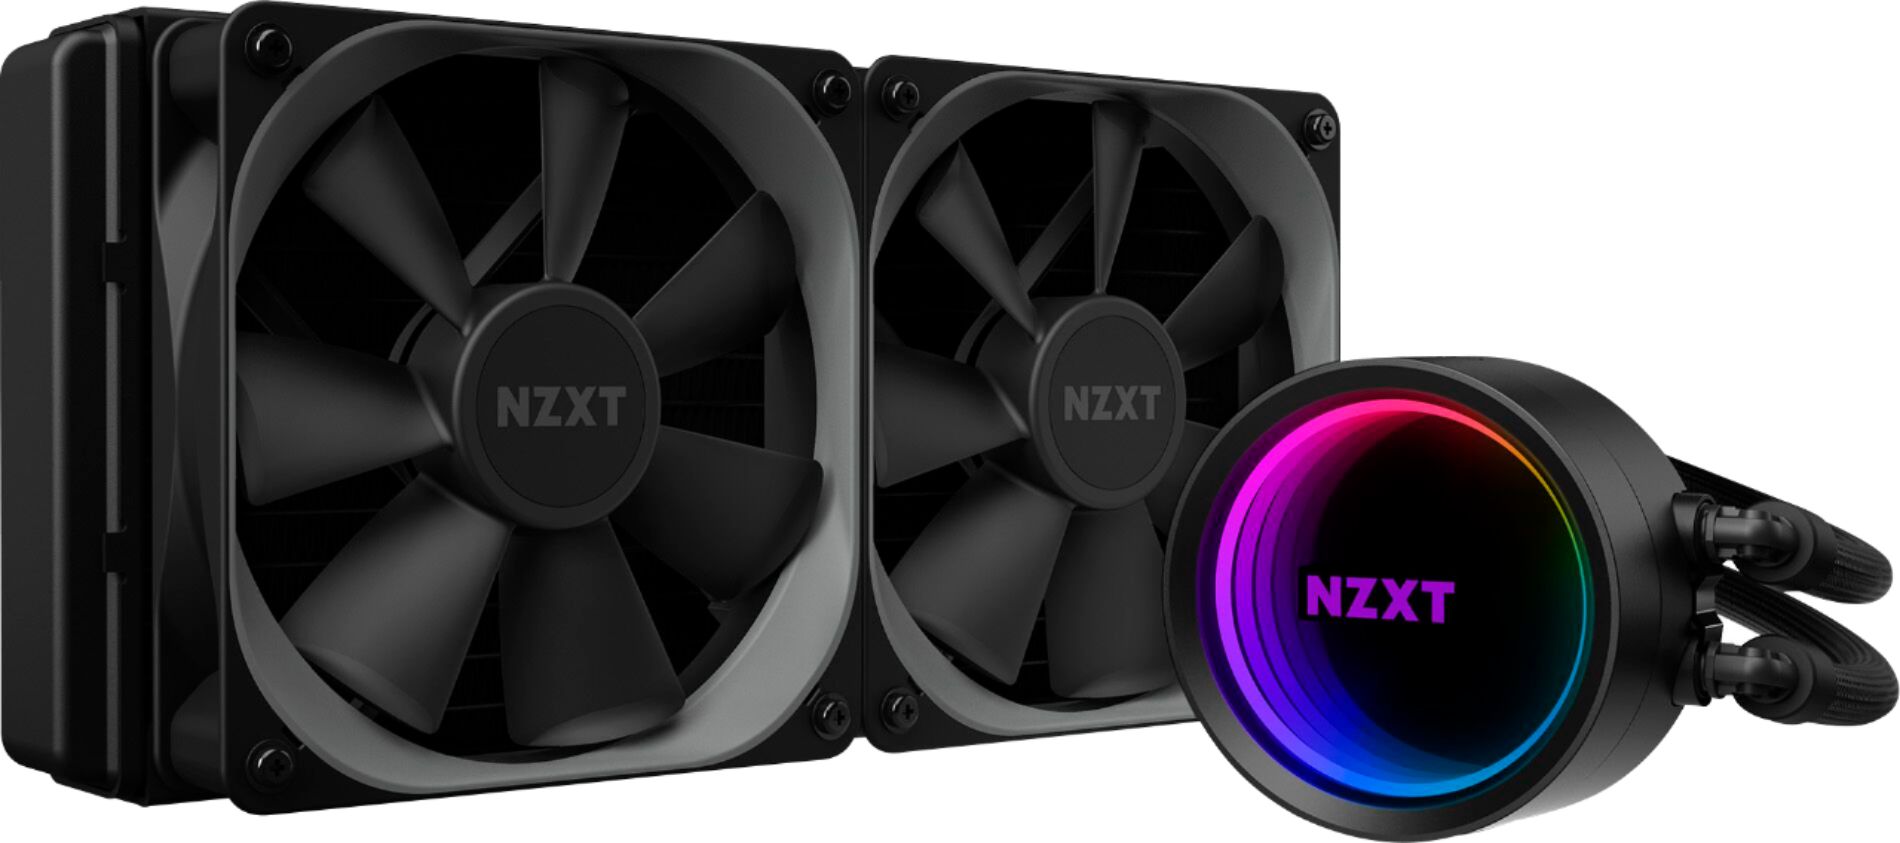 NZXT Kraken X53 RGB All-in-one 240mm Radiator CPU Liquid Cooling System